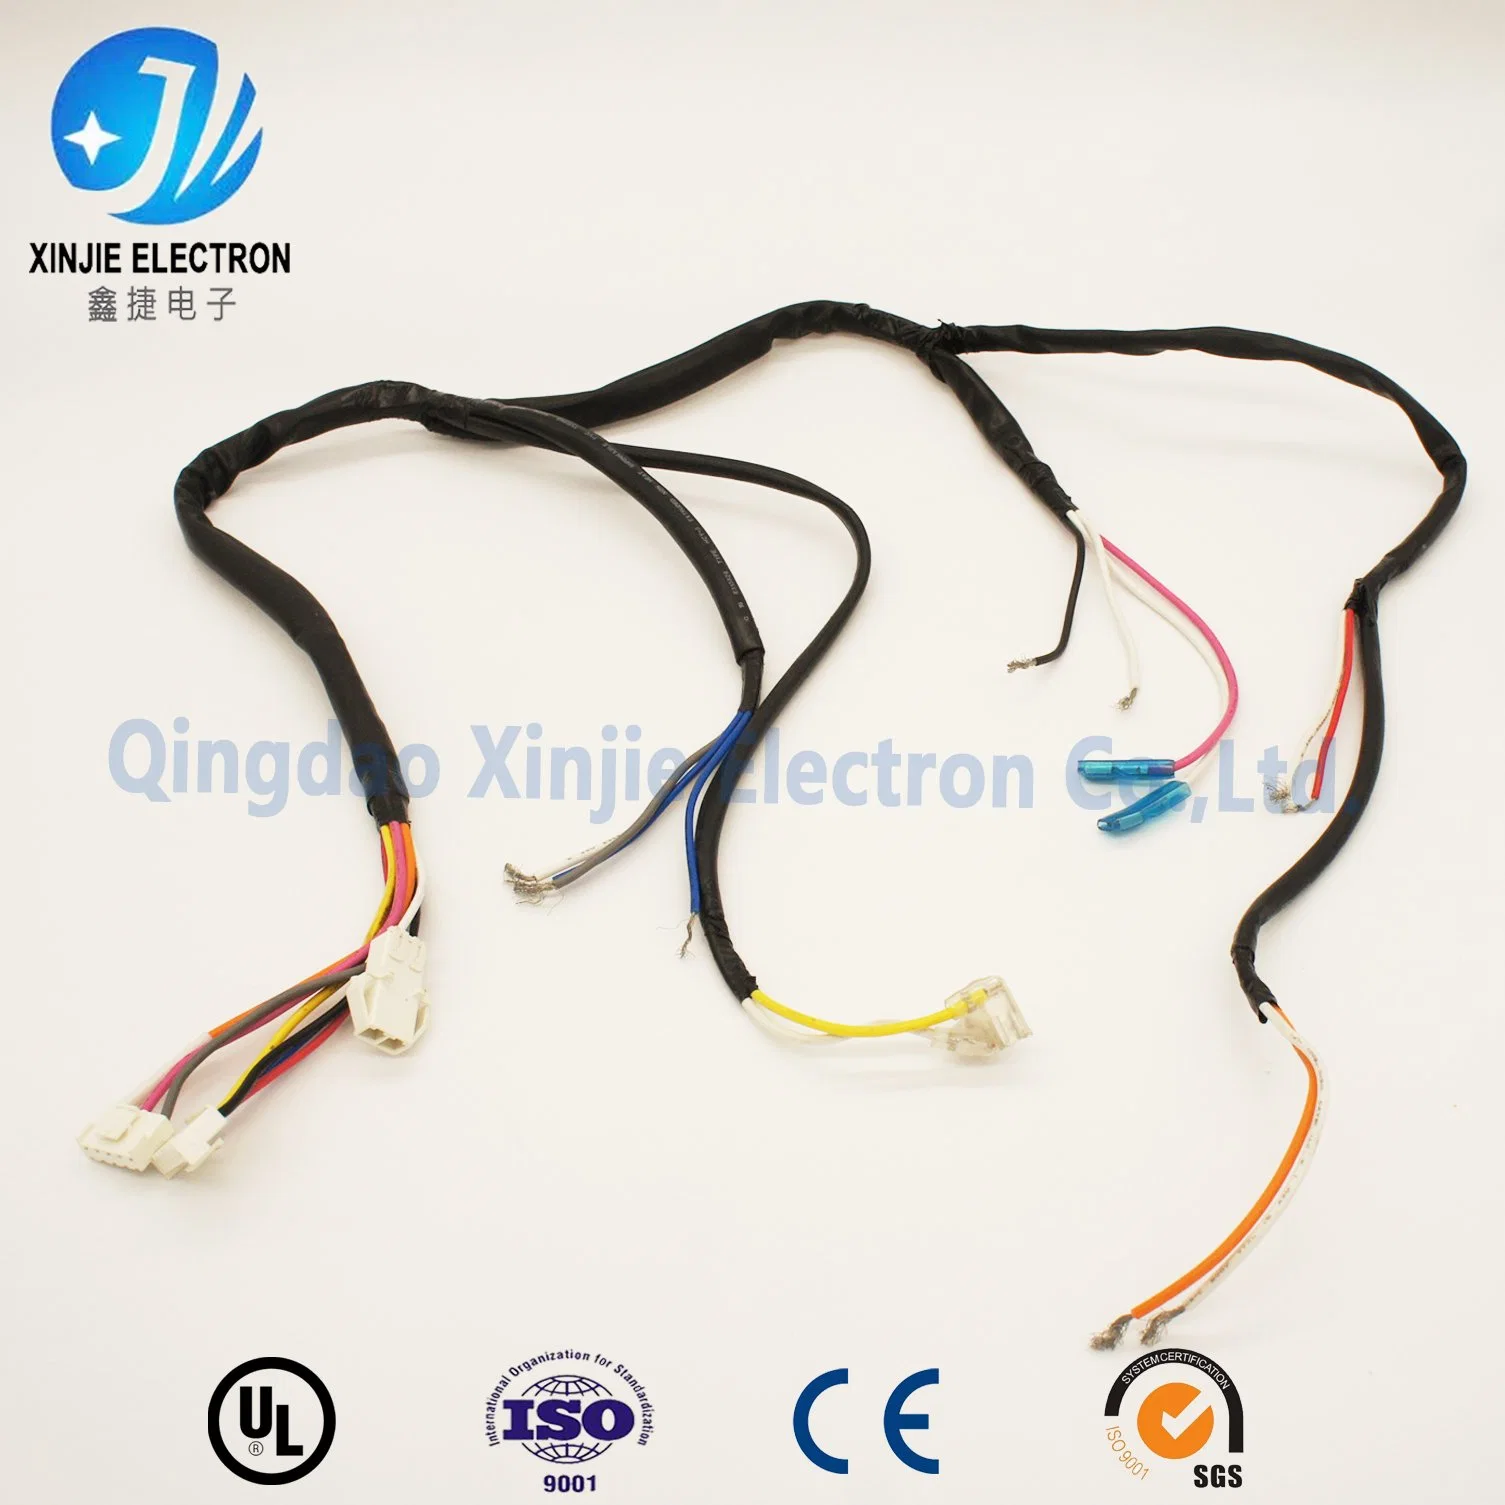 Manufacture Custom 9-12V LED Christmas Light Wire Harness Cable Assembly